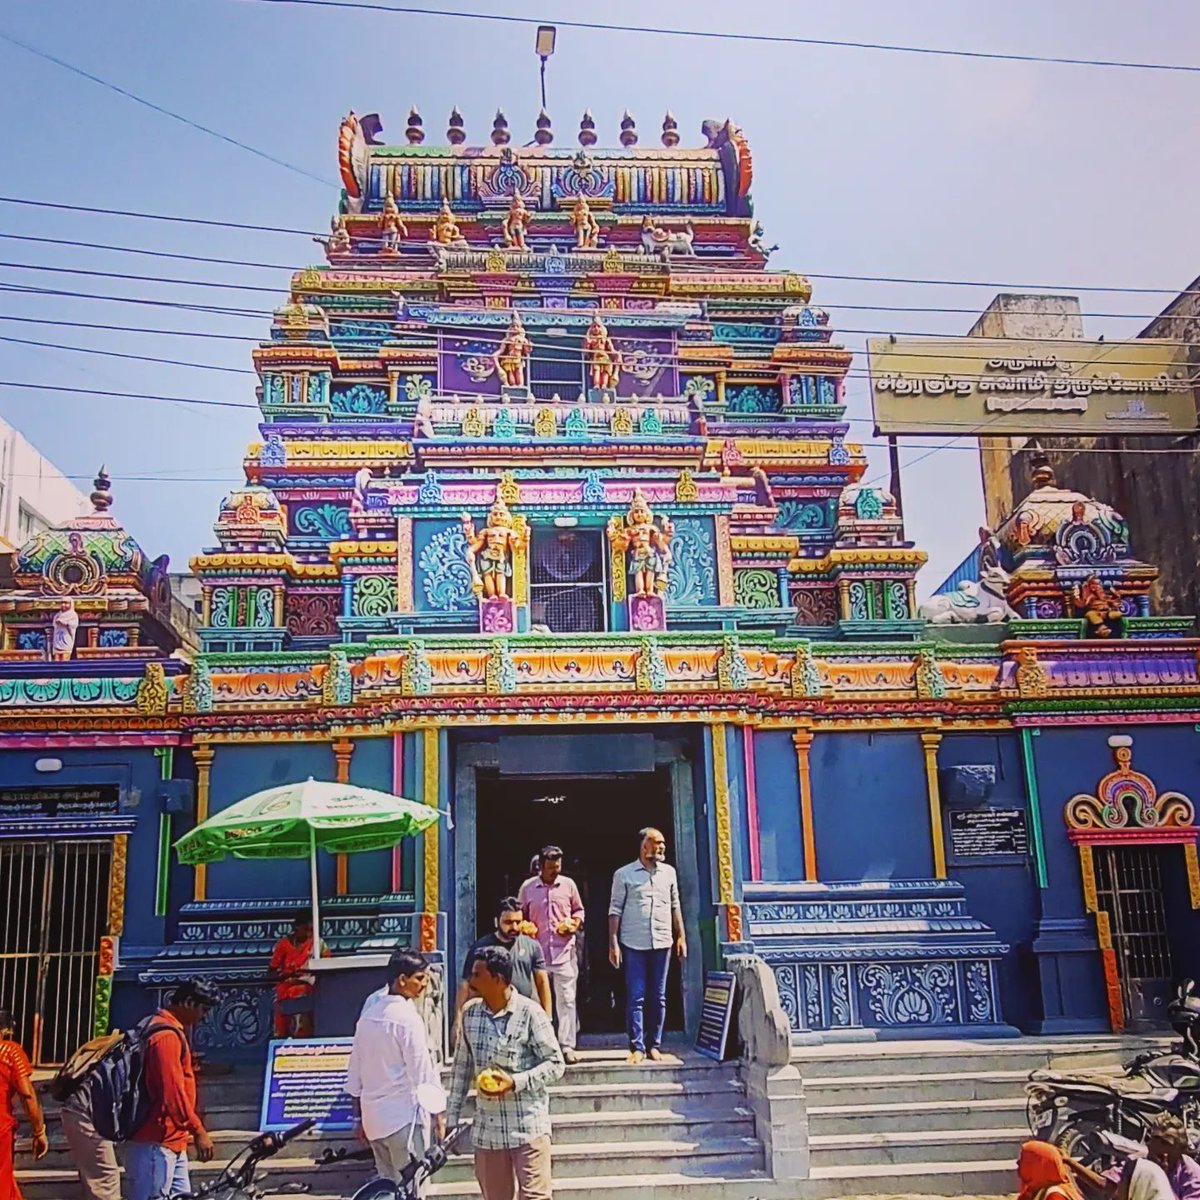 10) Shri Chitragupta Swamy Temple

The 9th-century Chitragupta Swamy Temple is a Chola creation. It is one of the few places of worship in India that’s dedicated to the Lord of Justice, Chitragupta.